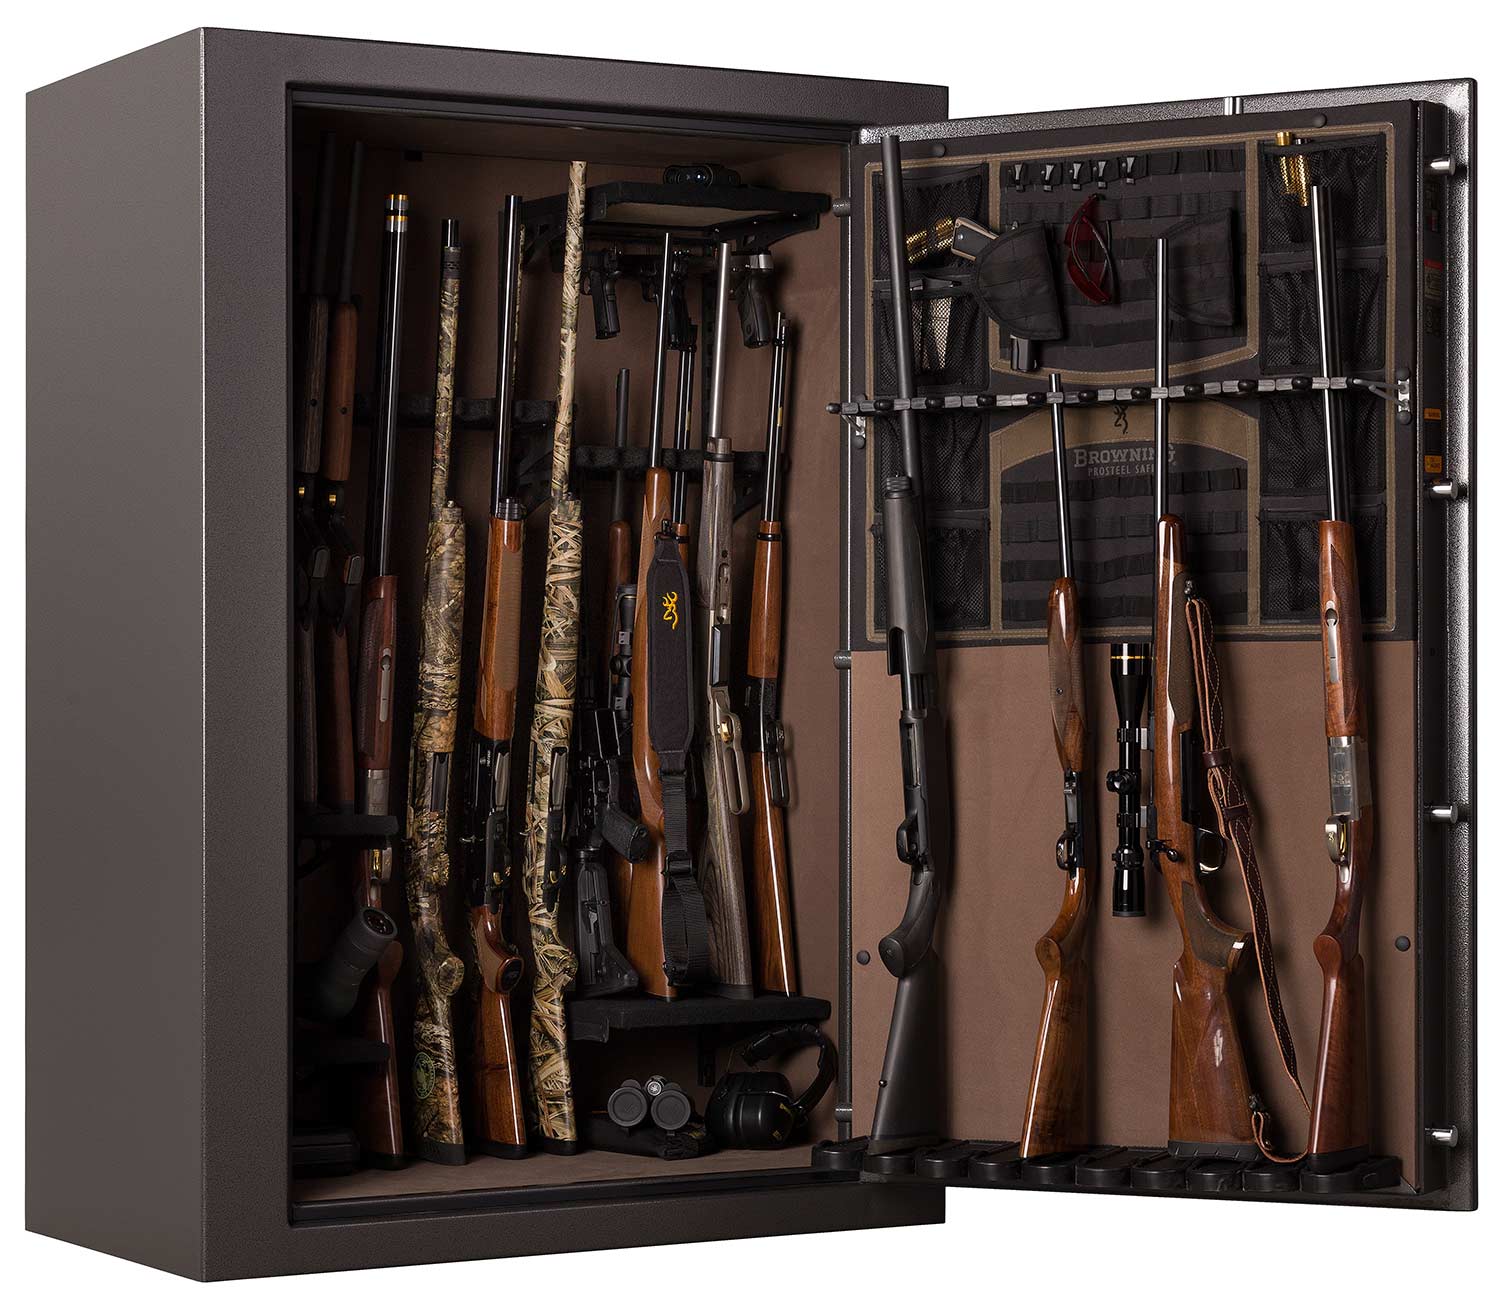 Pistol And Revolver rack with storage area on bottom level